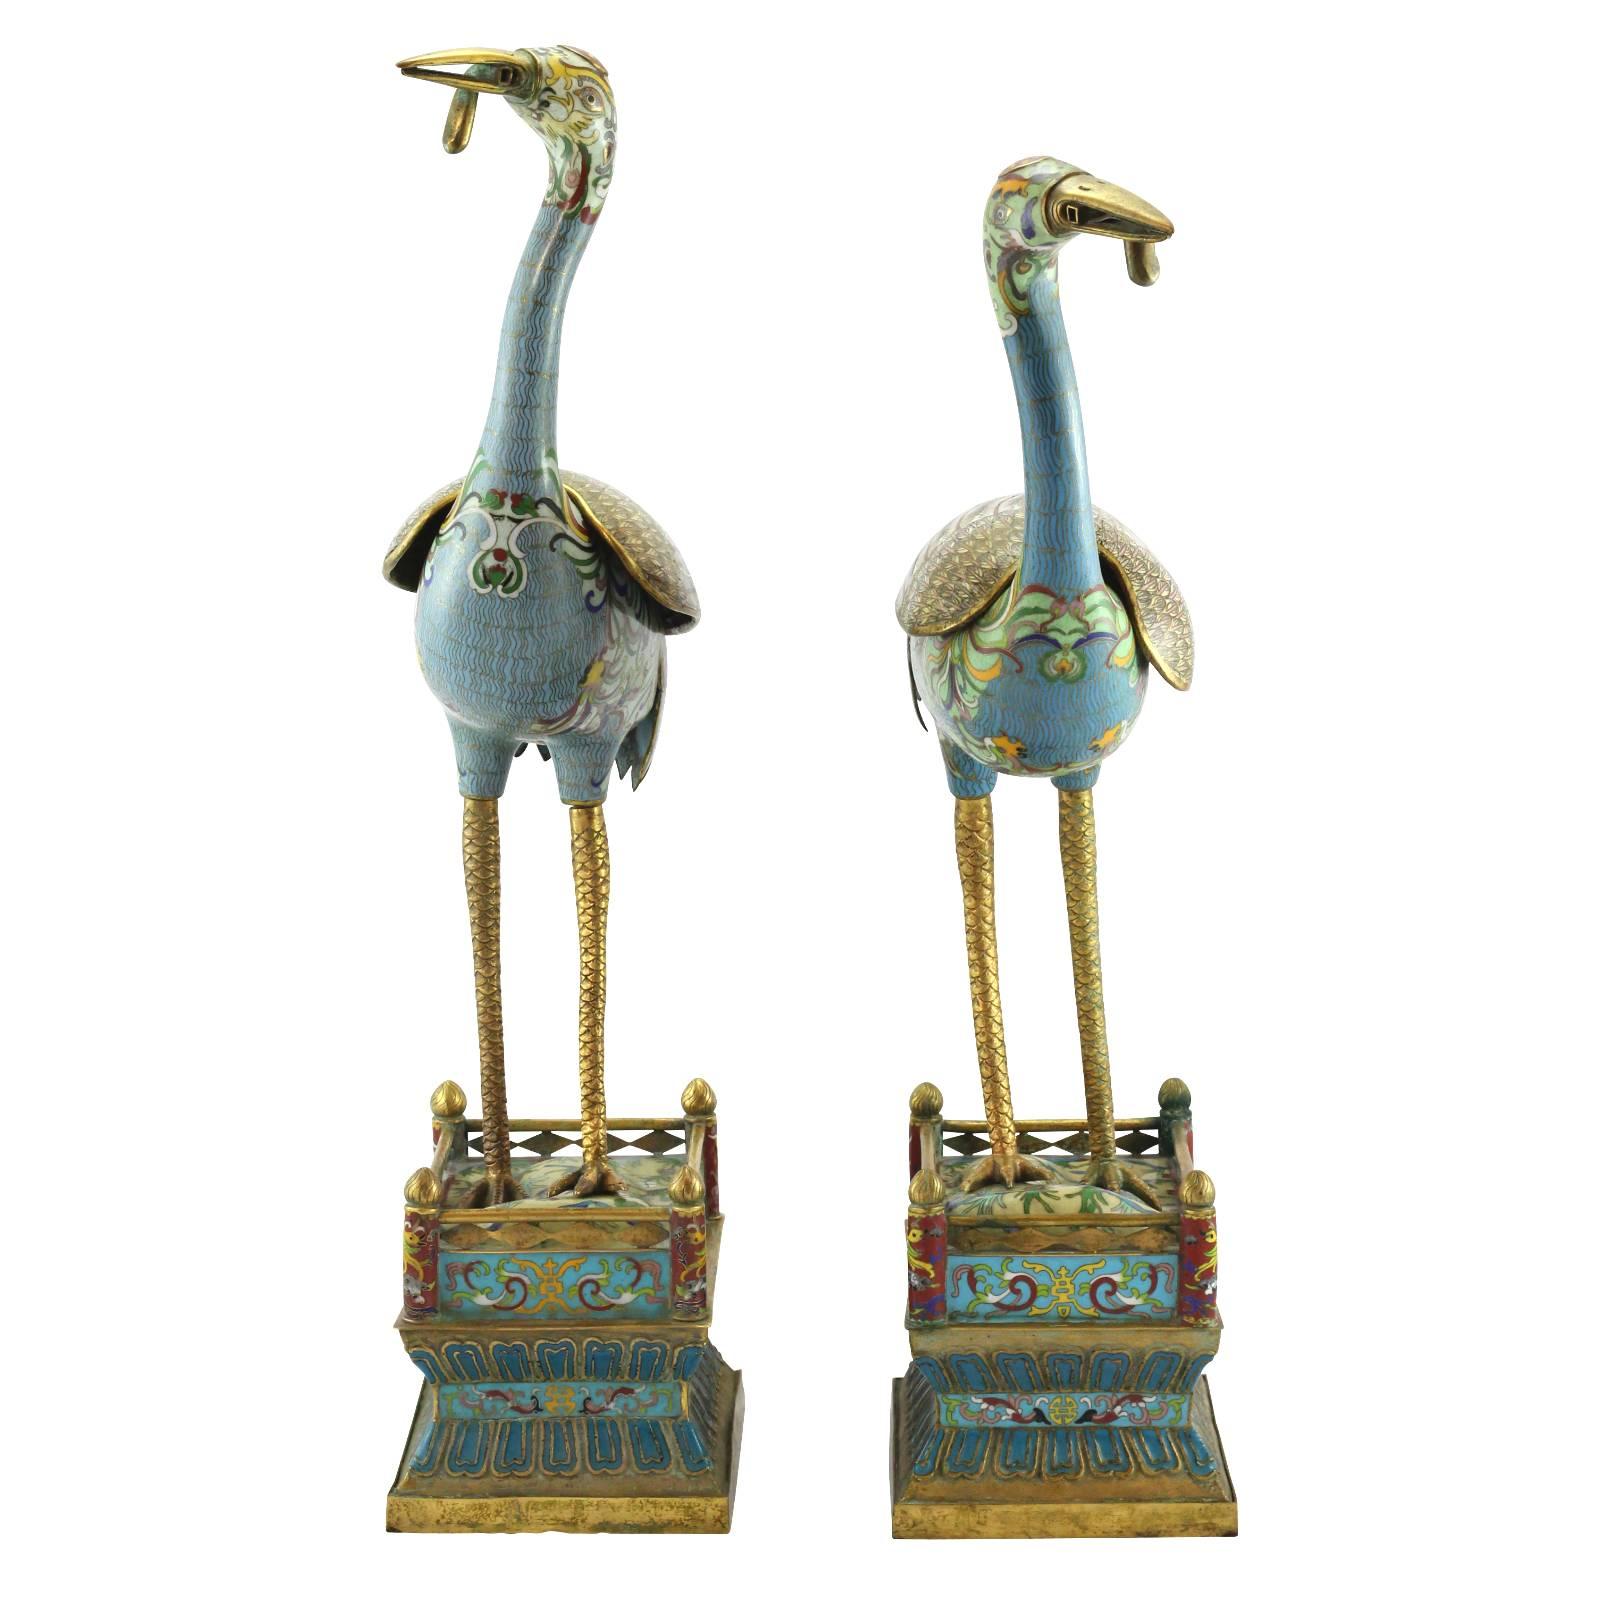 A pair of 20th century Chinese Republic figural cloisonné censers, in the form of cranes. Most likely manufactured as export ware between 1912 and 1949, this pair of incense burners feature detailed enamel work, with a variety of colors ranging from